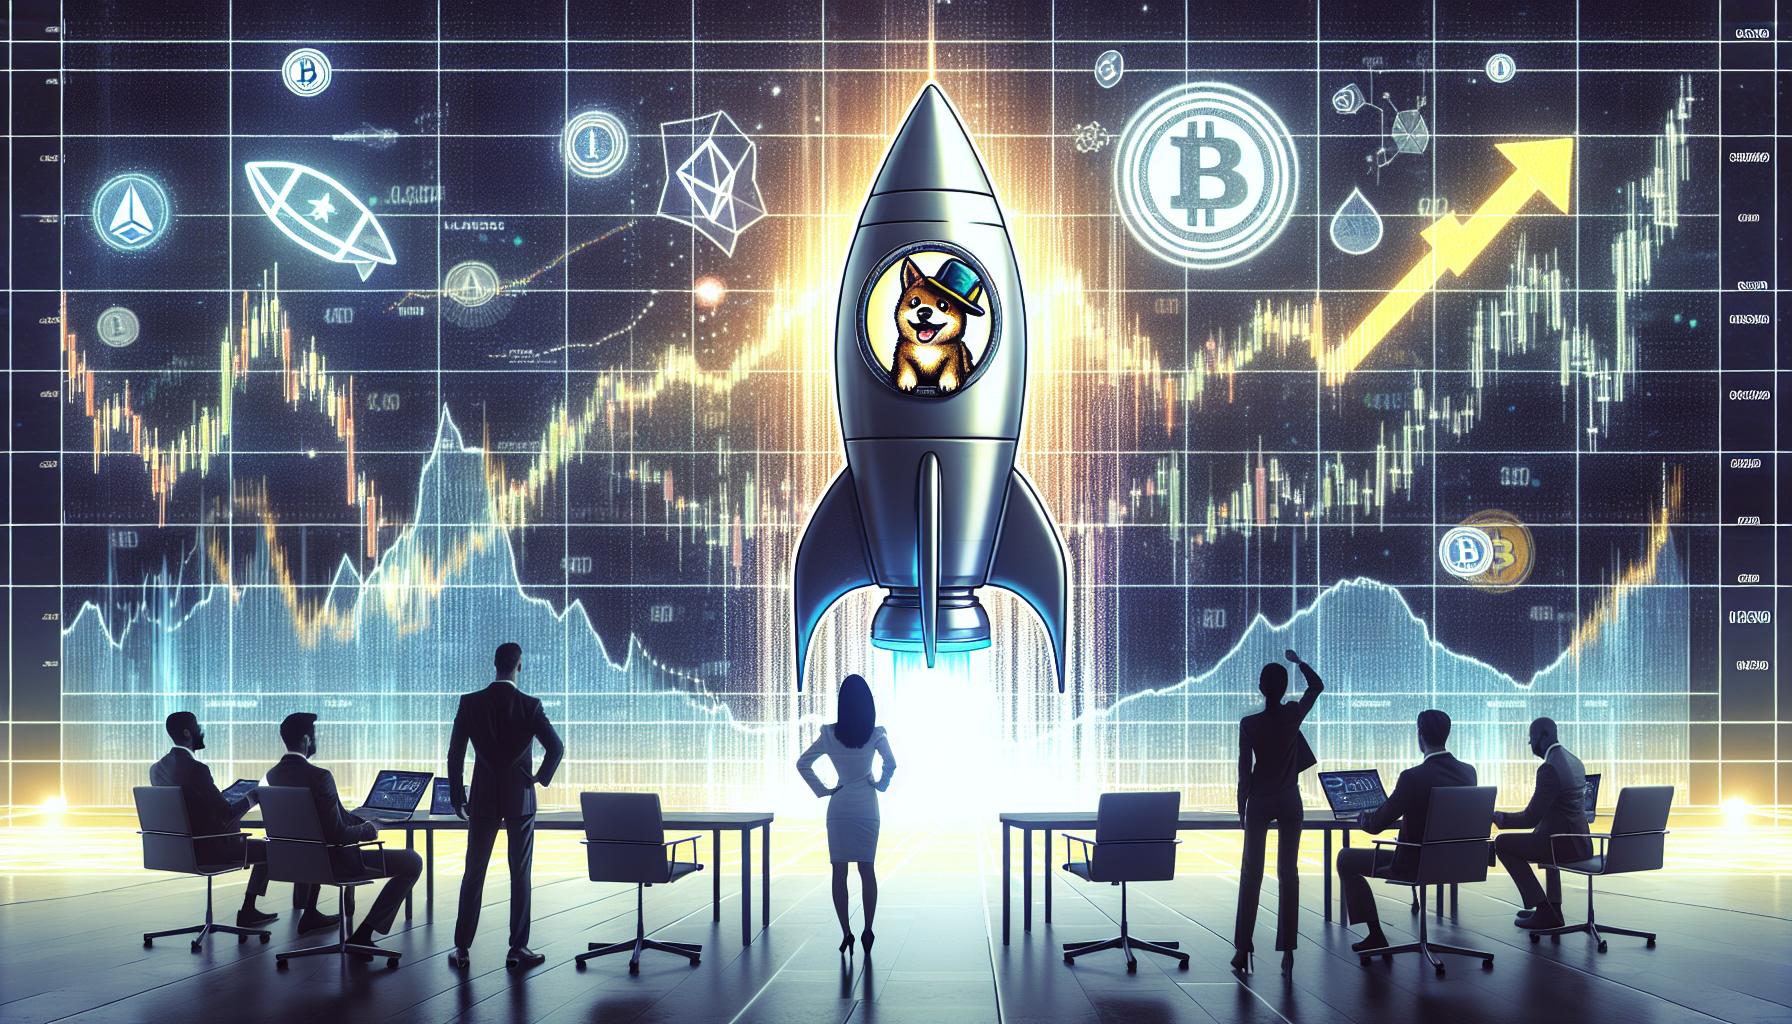 Top Analyst Predicts Solana-Based Altcoin To Skyrocket Over 350% | FinOracle